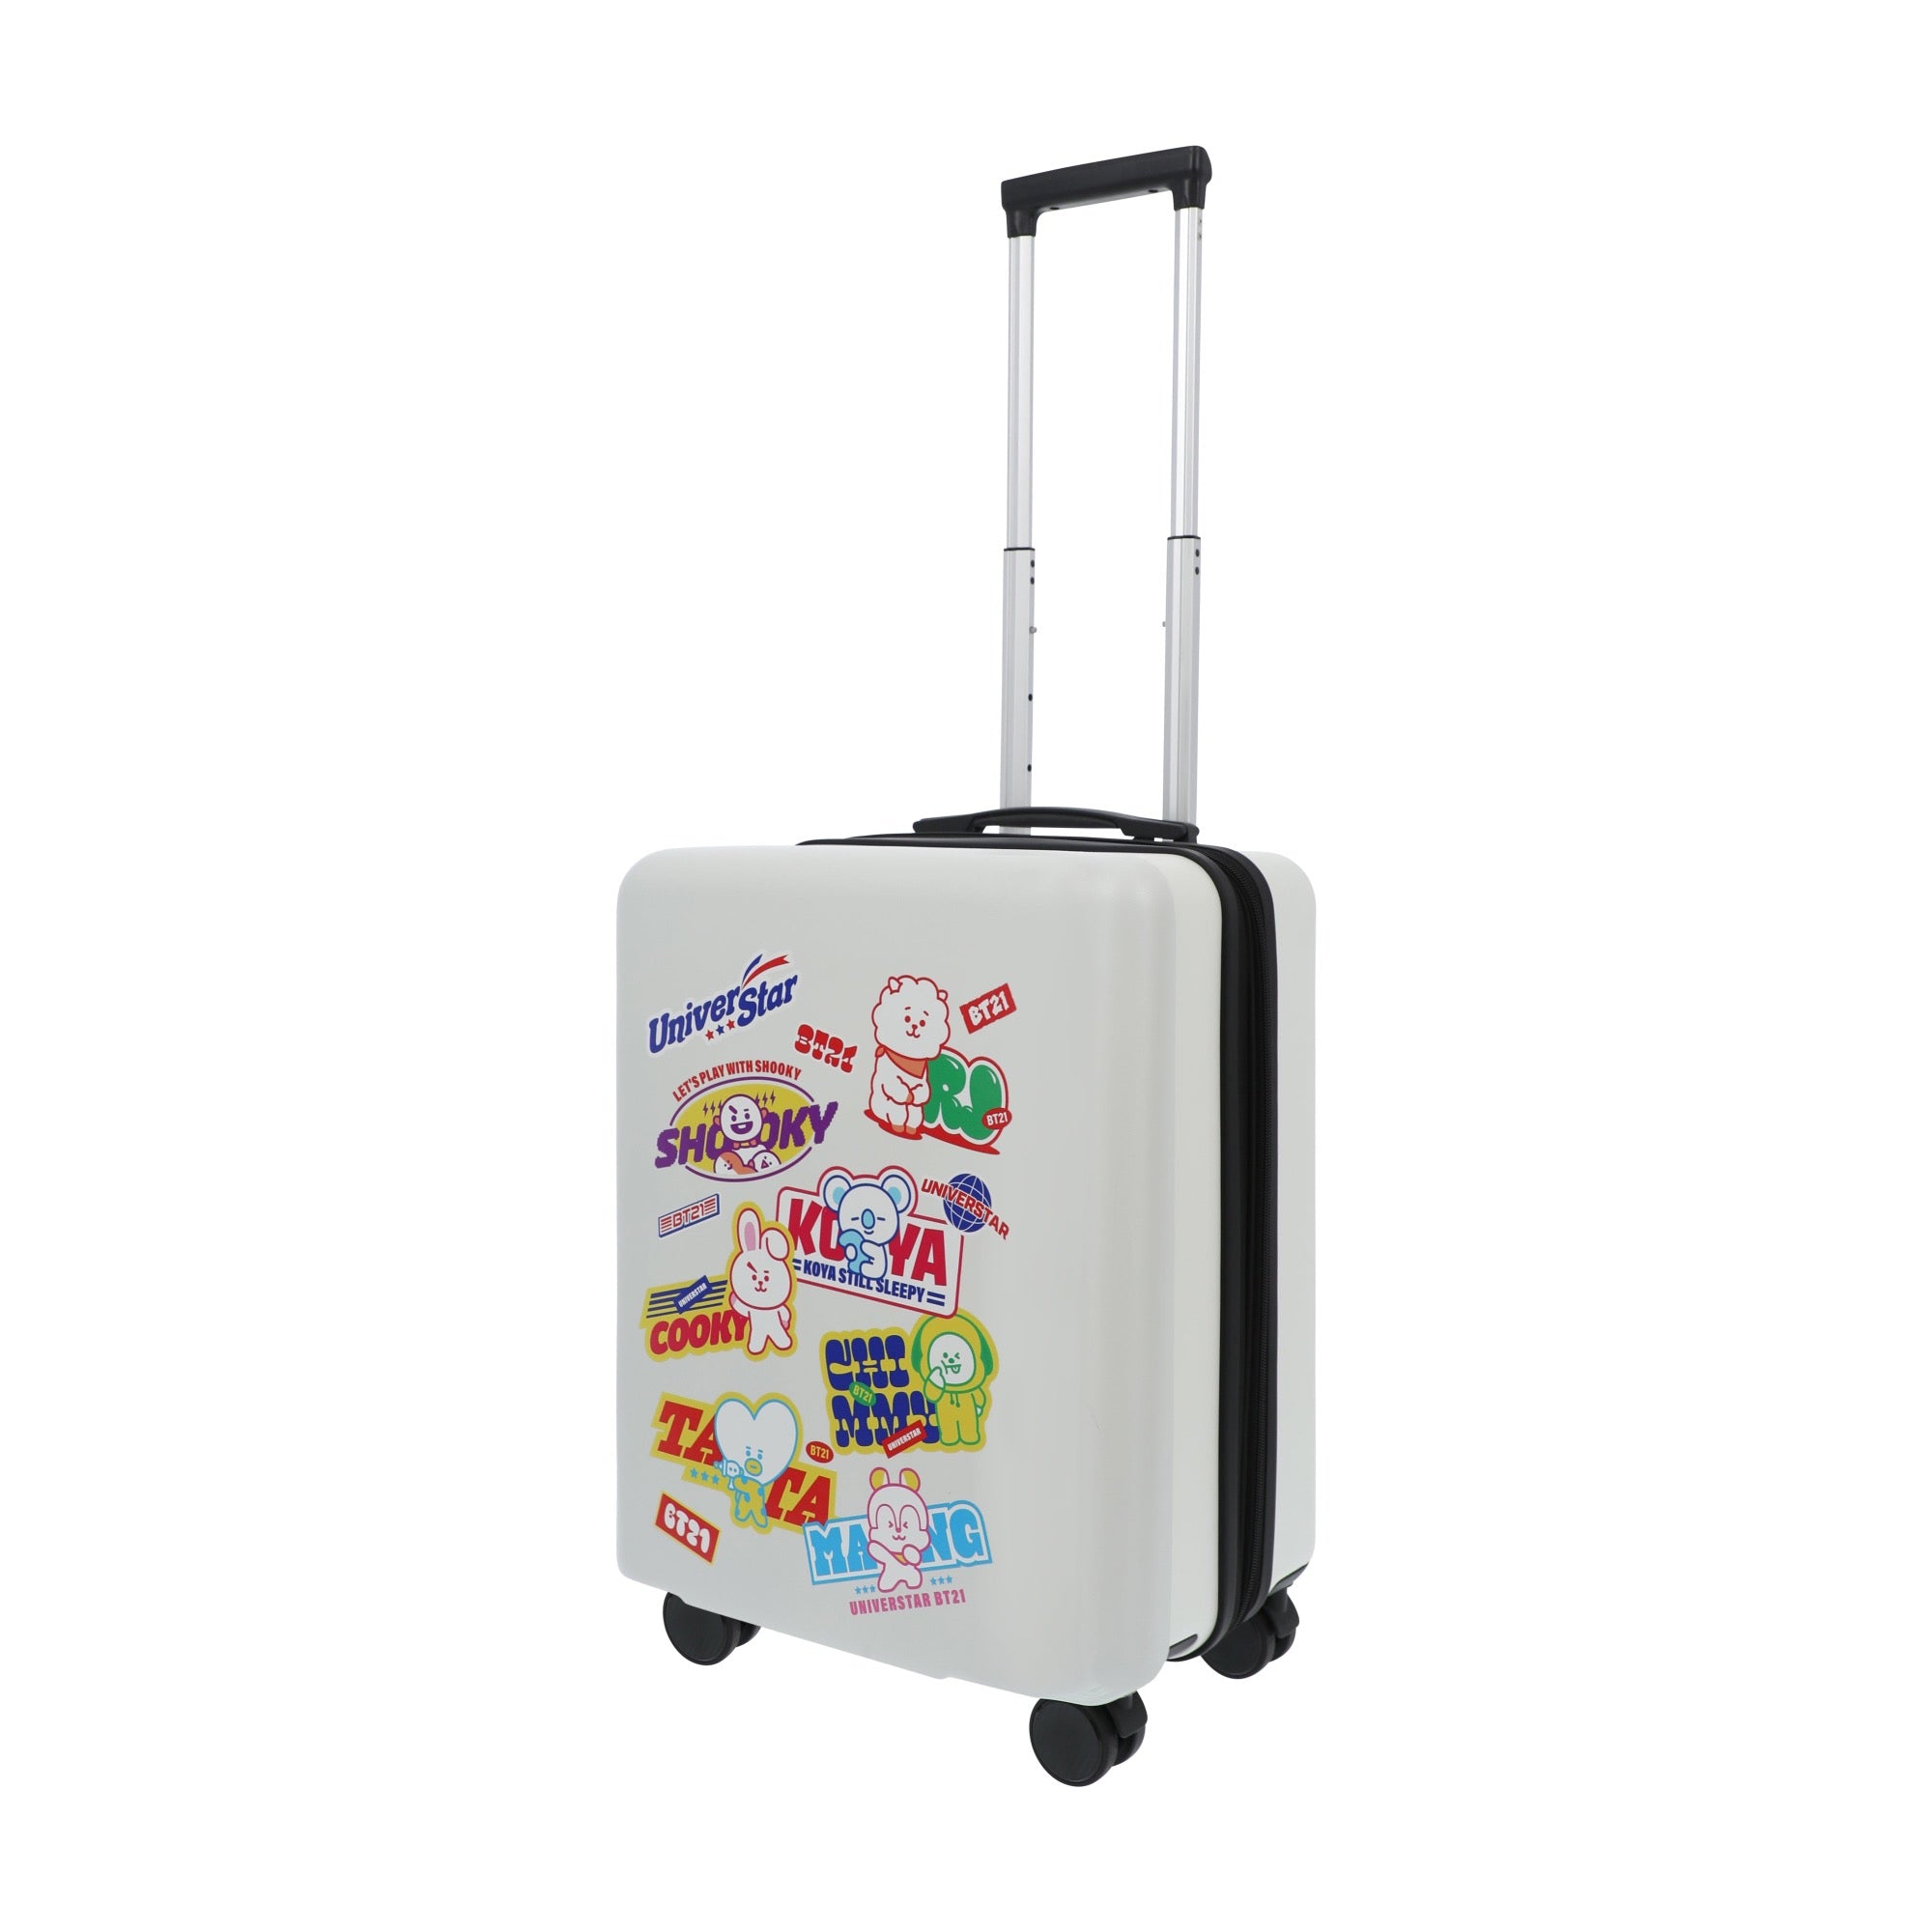 White BT21 22.5" carry-on spinner suitcase luggage by Ful